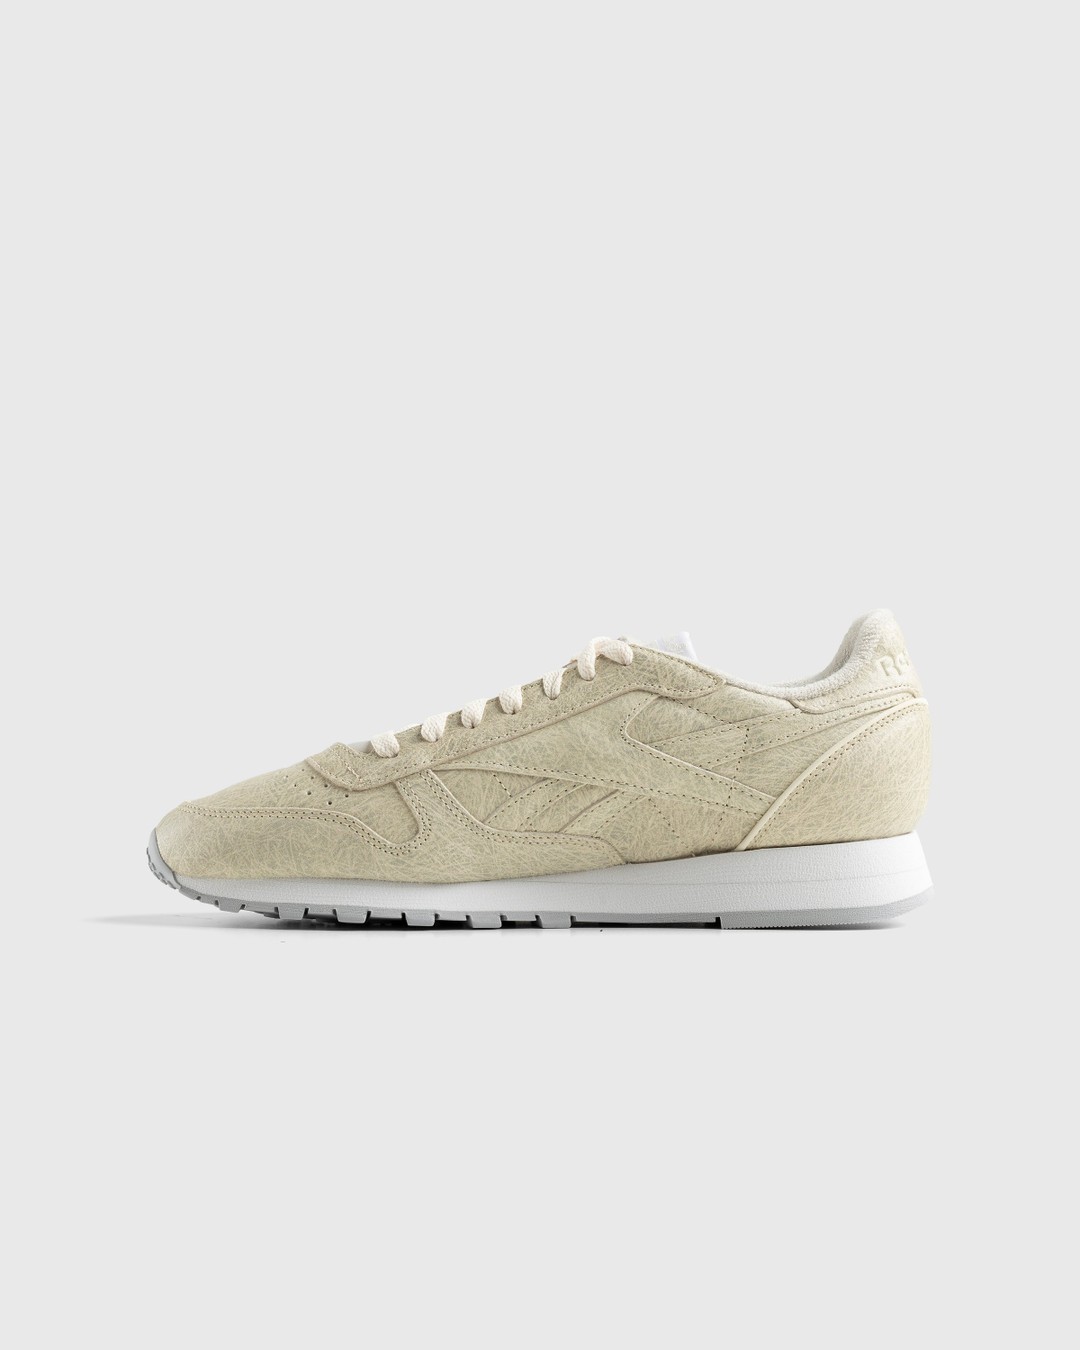 Reebok – Eames Classic Leather Sand - Low Top Sneakers - Beige - Image 2